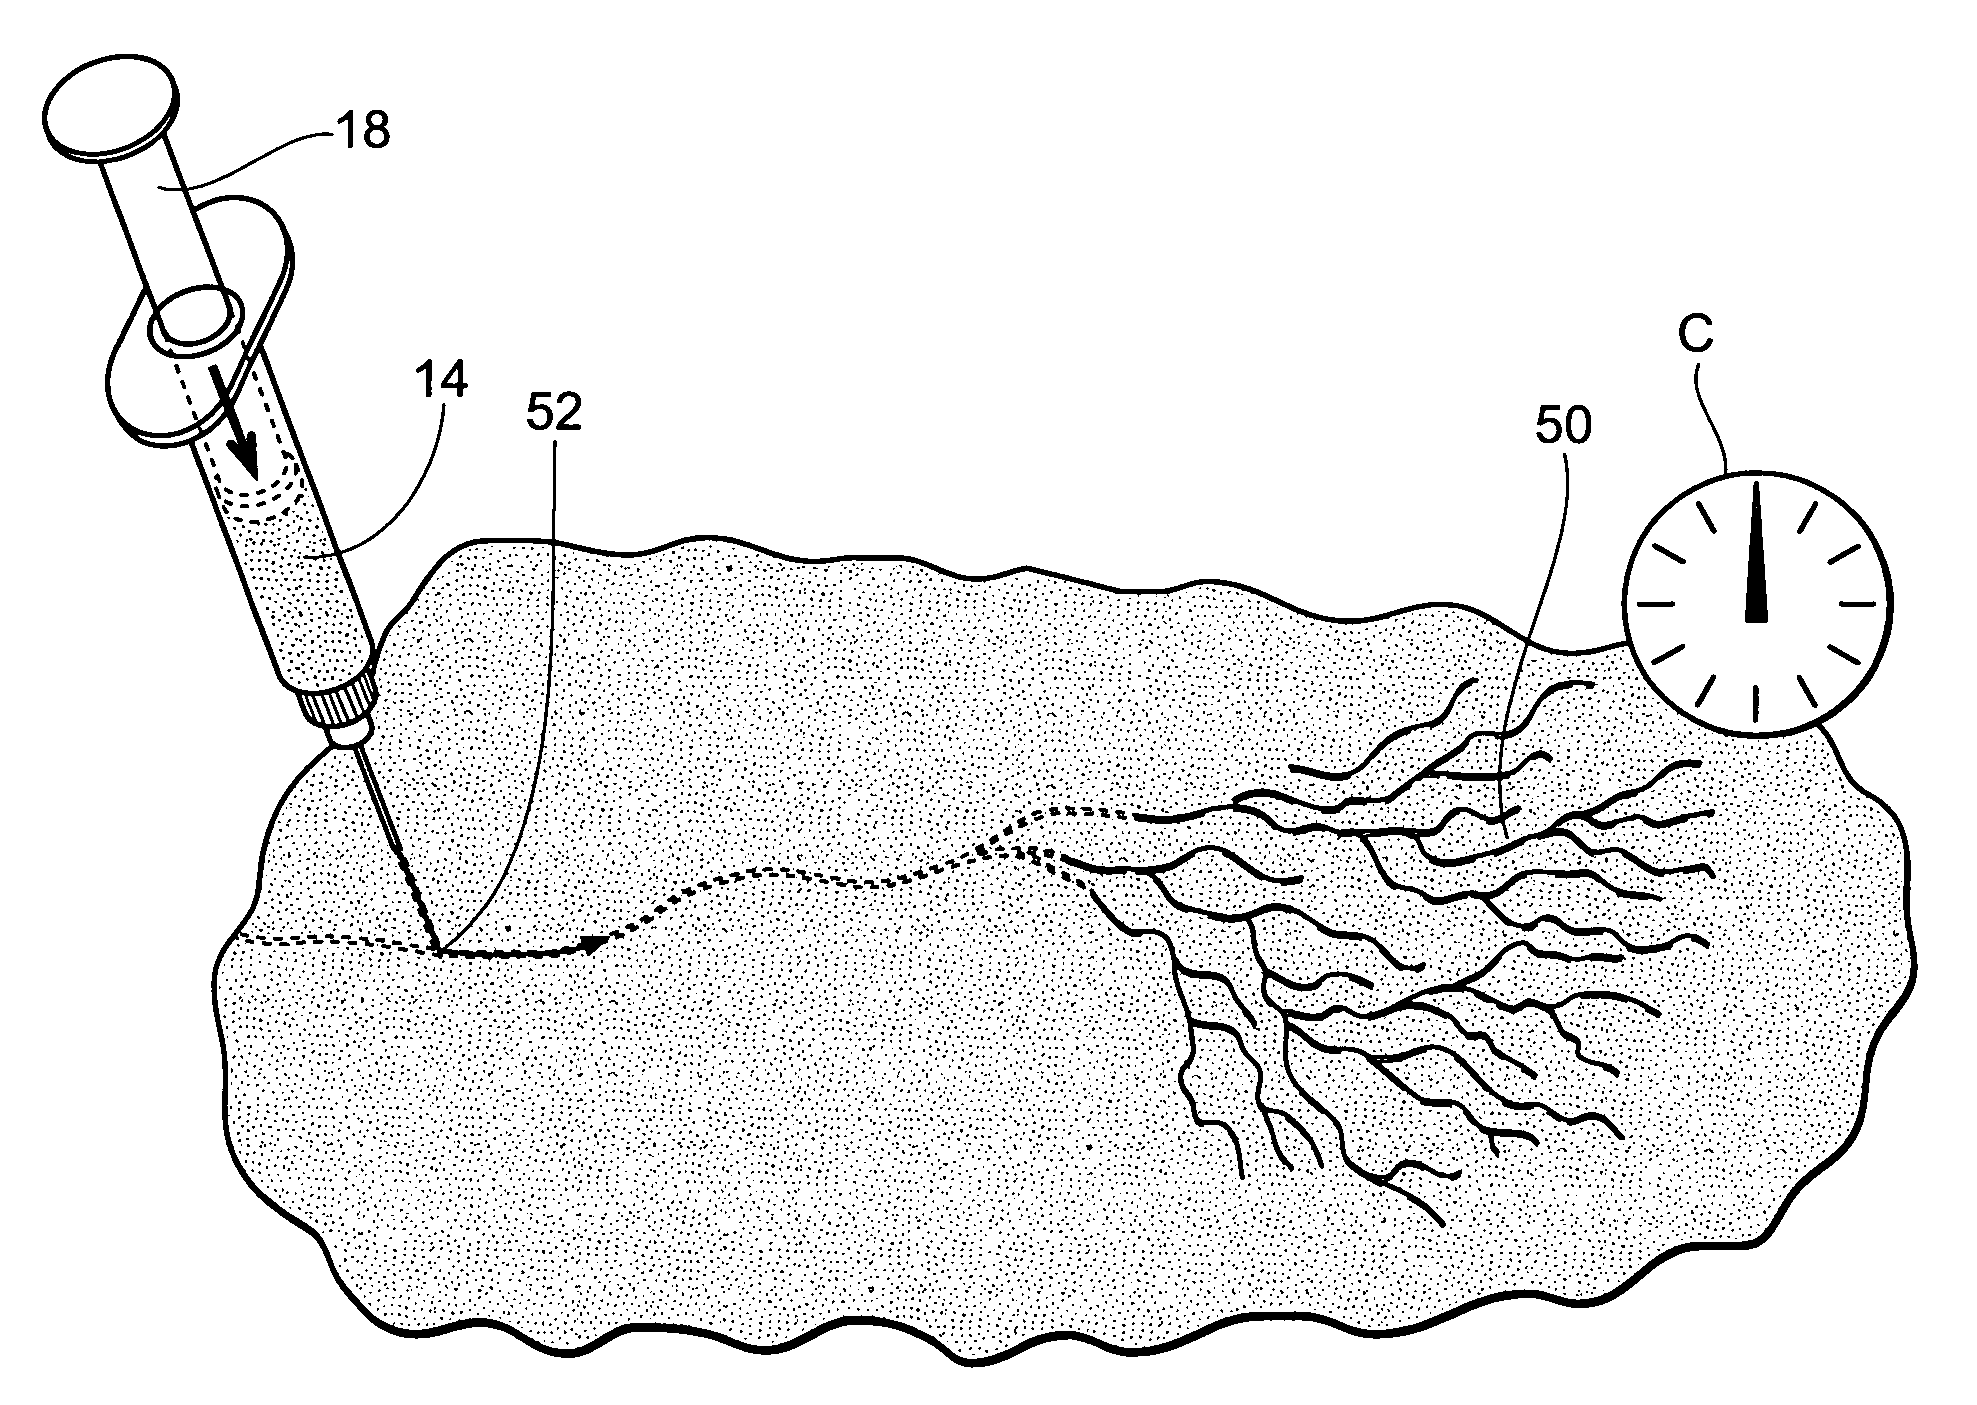 Systems and methods for treating superficial venous malformations like spider veins